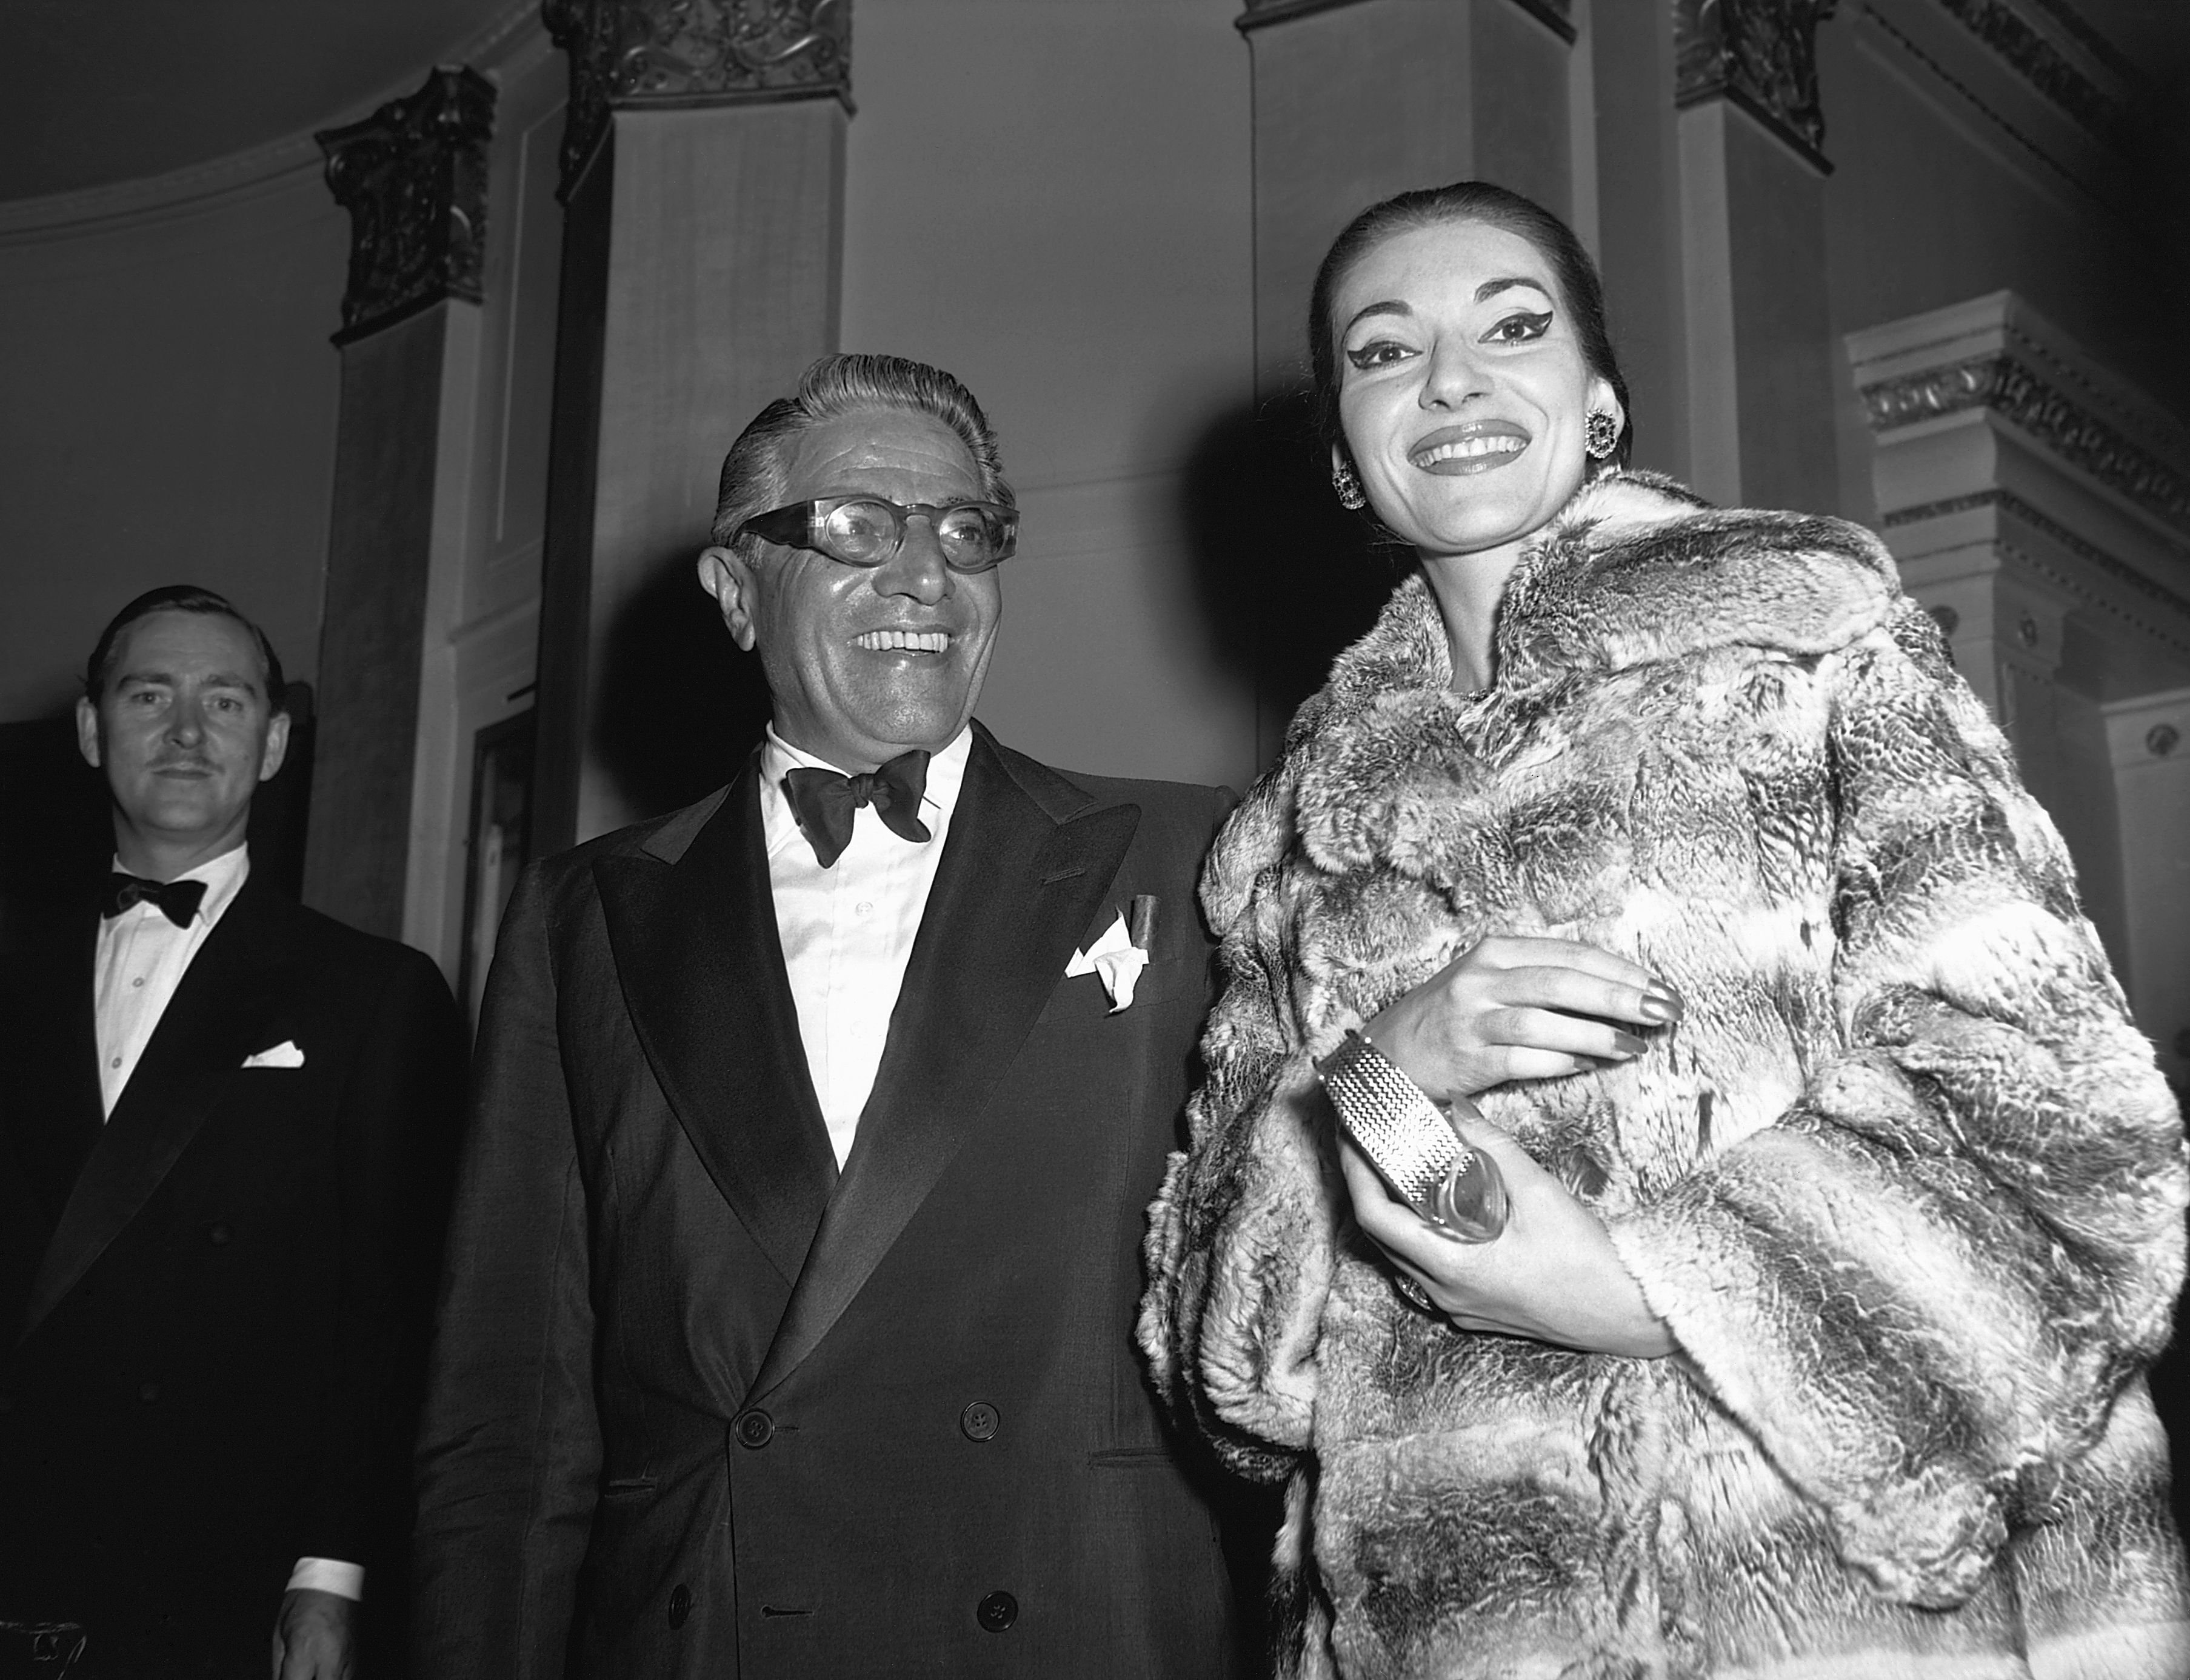 Greek shipping tycoon Aristotle Onassis with opera singer Maria Callas on June 21, 1959 | Photo: © Hulton-Deutsch Collection/Corbis/Getty Images